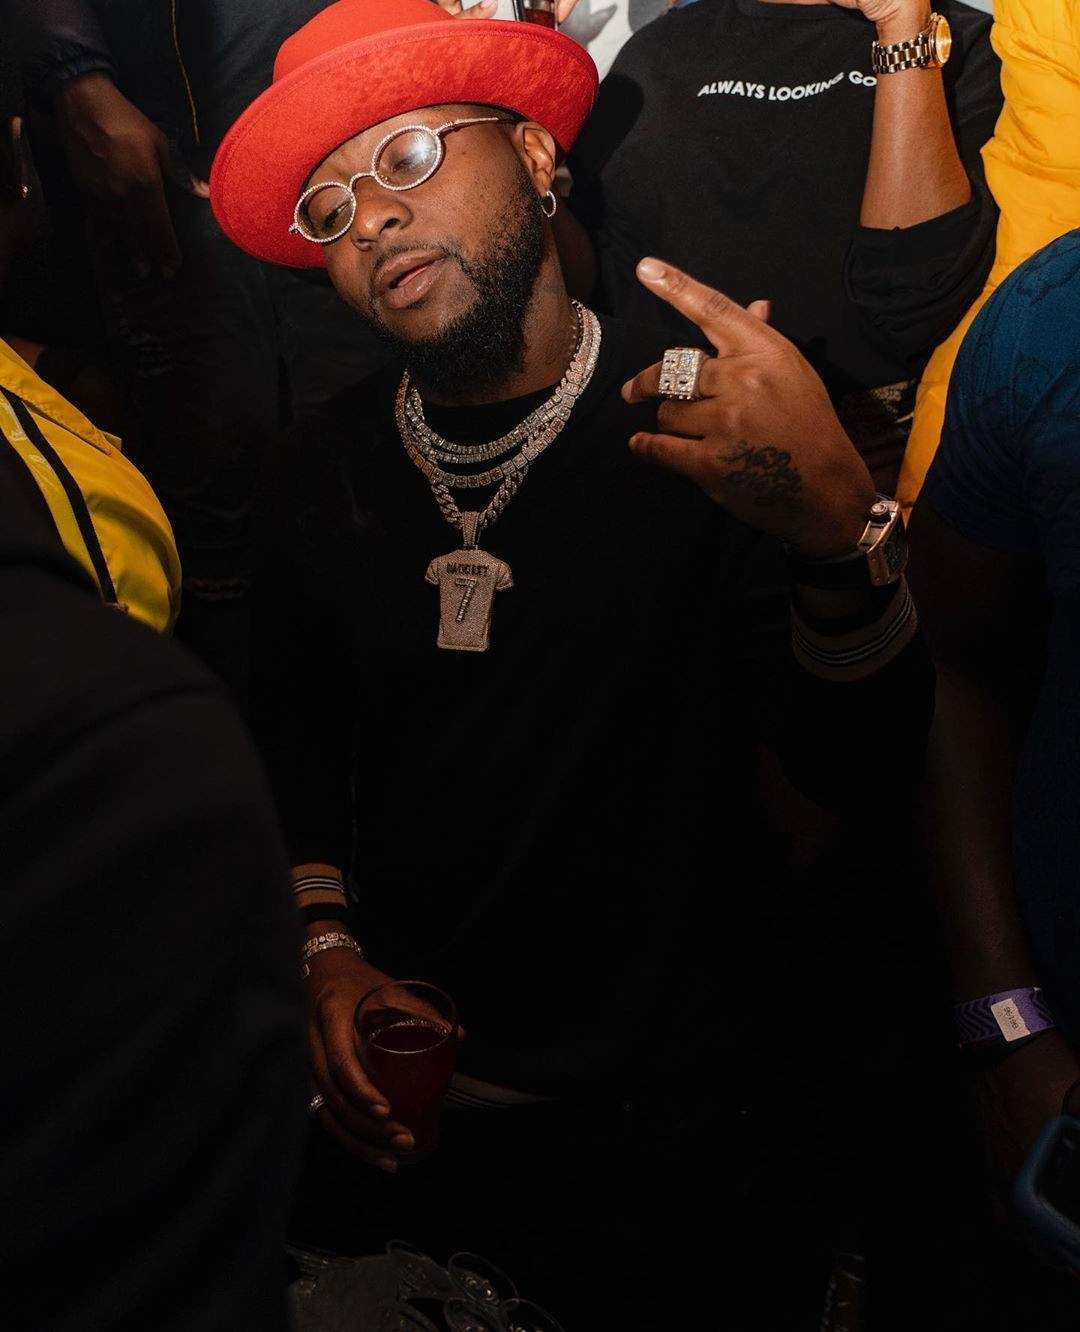 Davido buys another diamond plated eyeglass, barely a day after the former one got missing (Video)